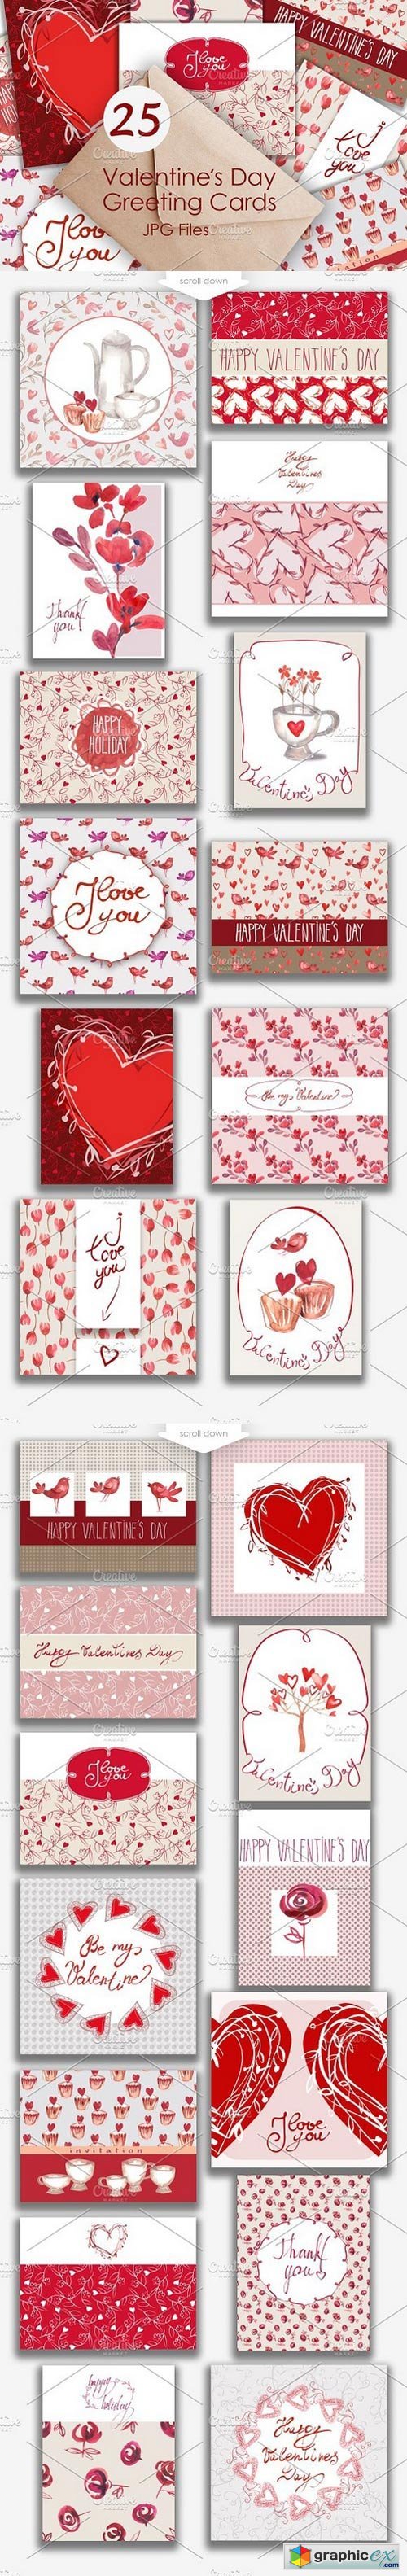 25 Valentines Day Greeting Card